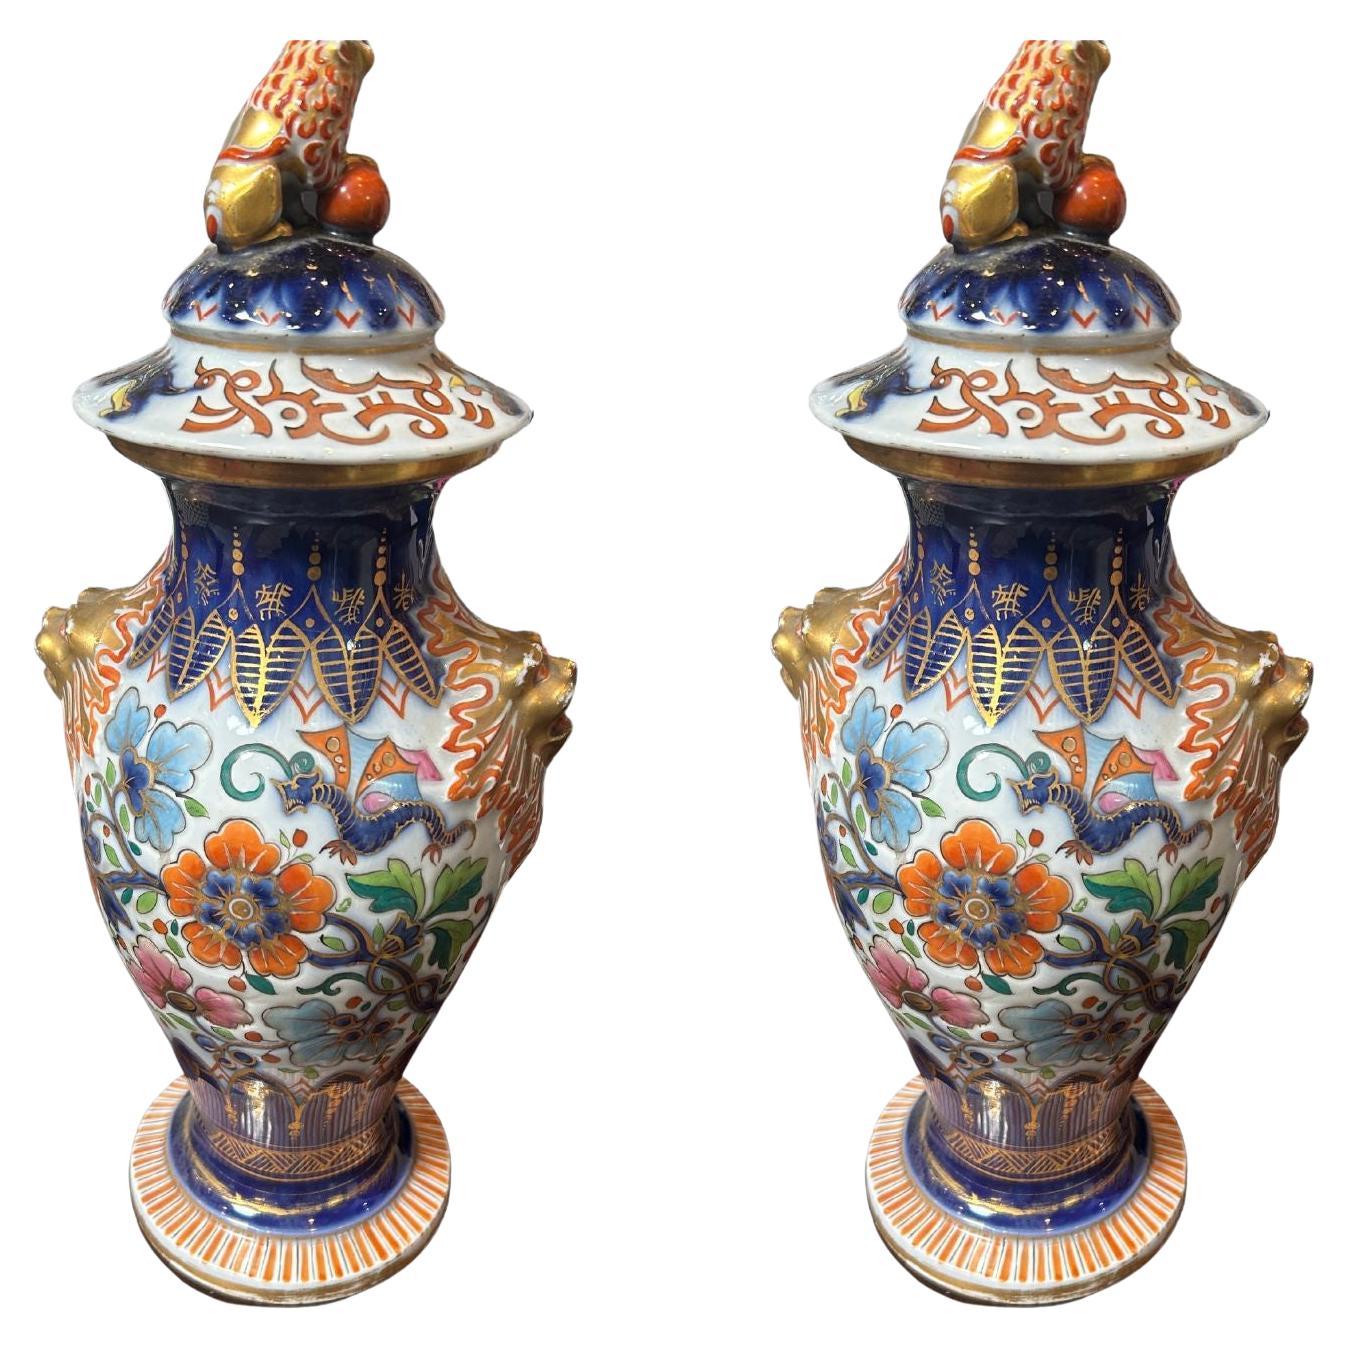 19th Century Painted Chinese Export Clobbered Ware